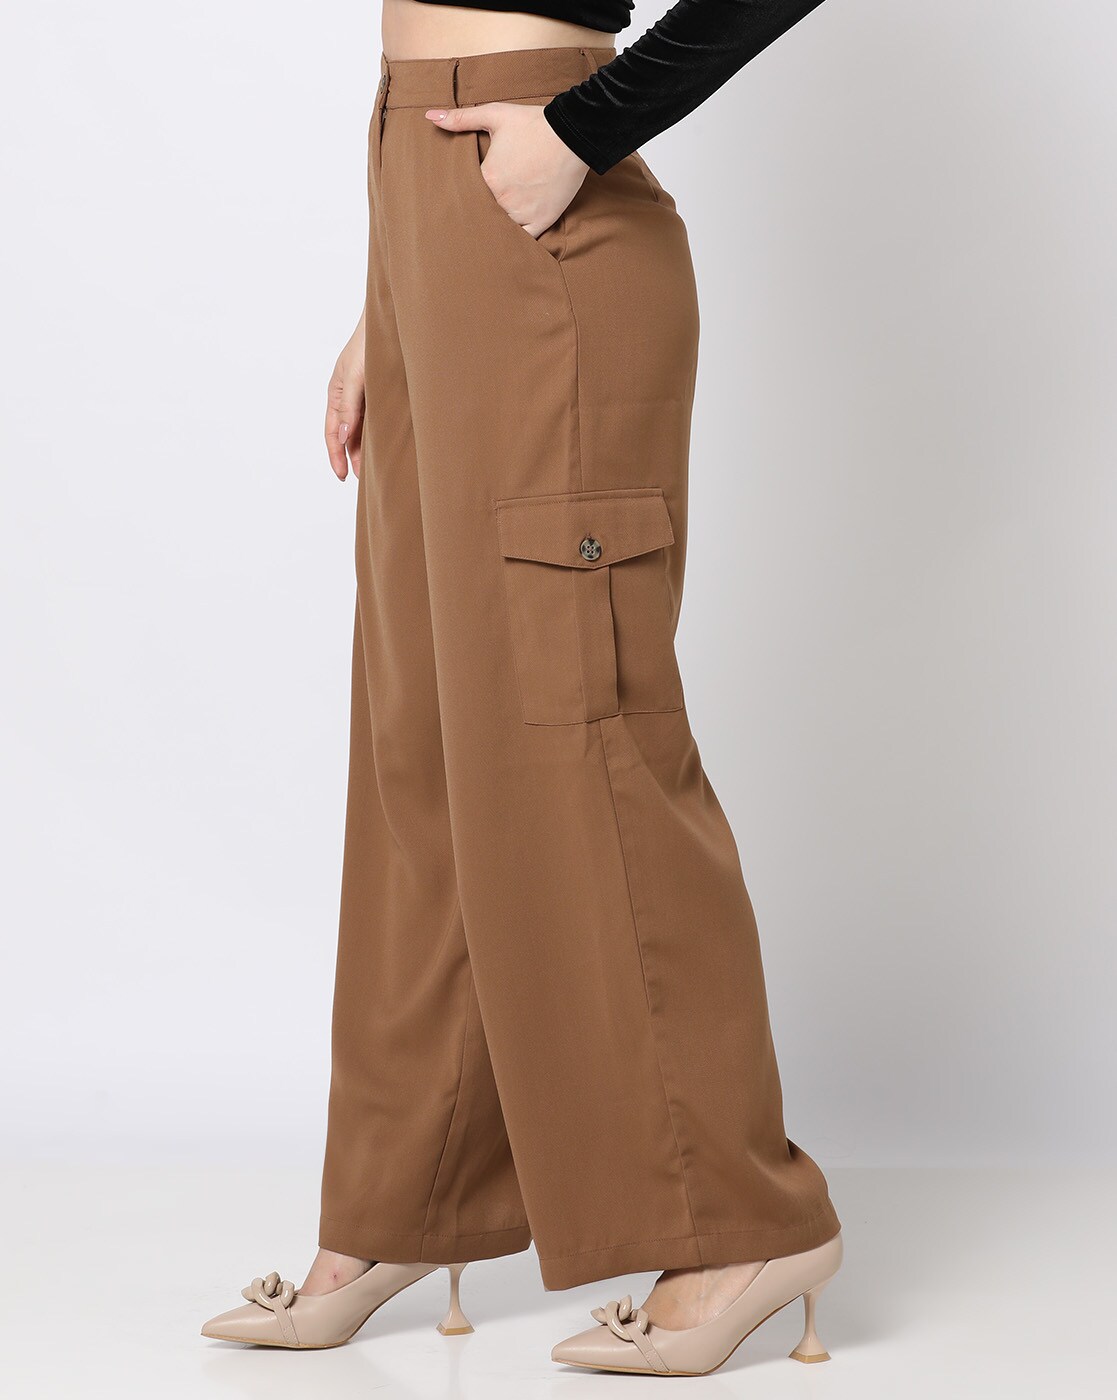 New Look cargo trouser with contrast stitch in light brown | ASOS